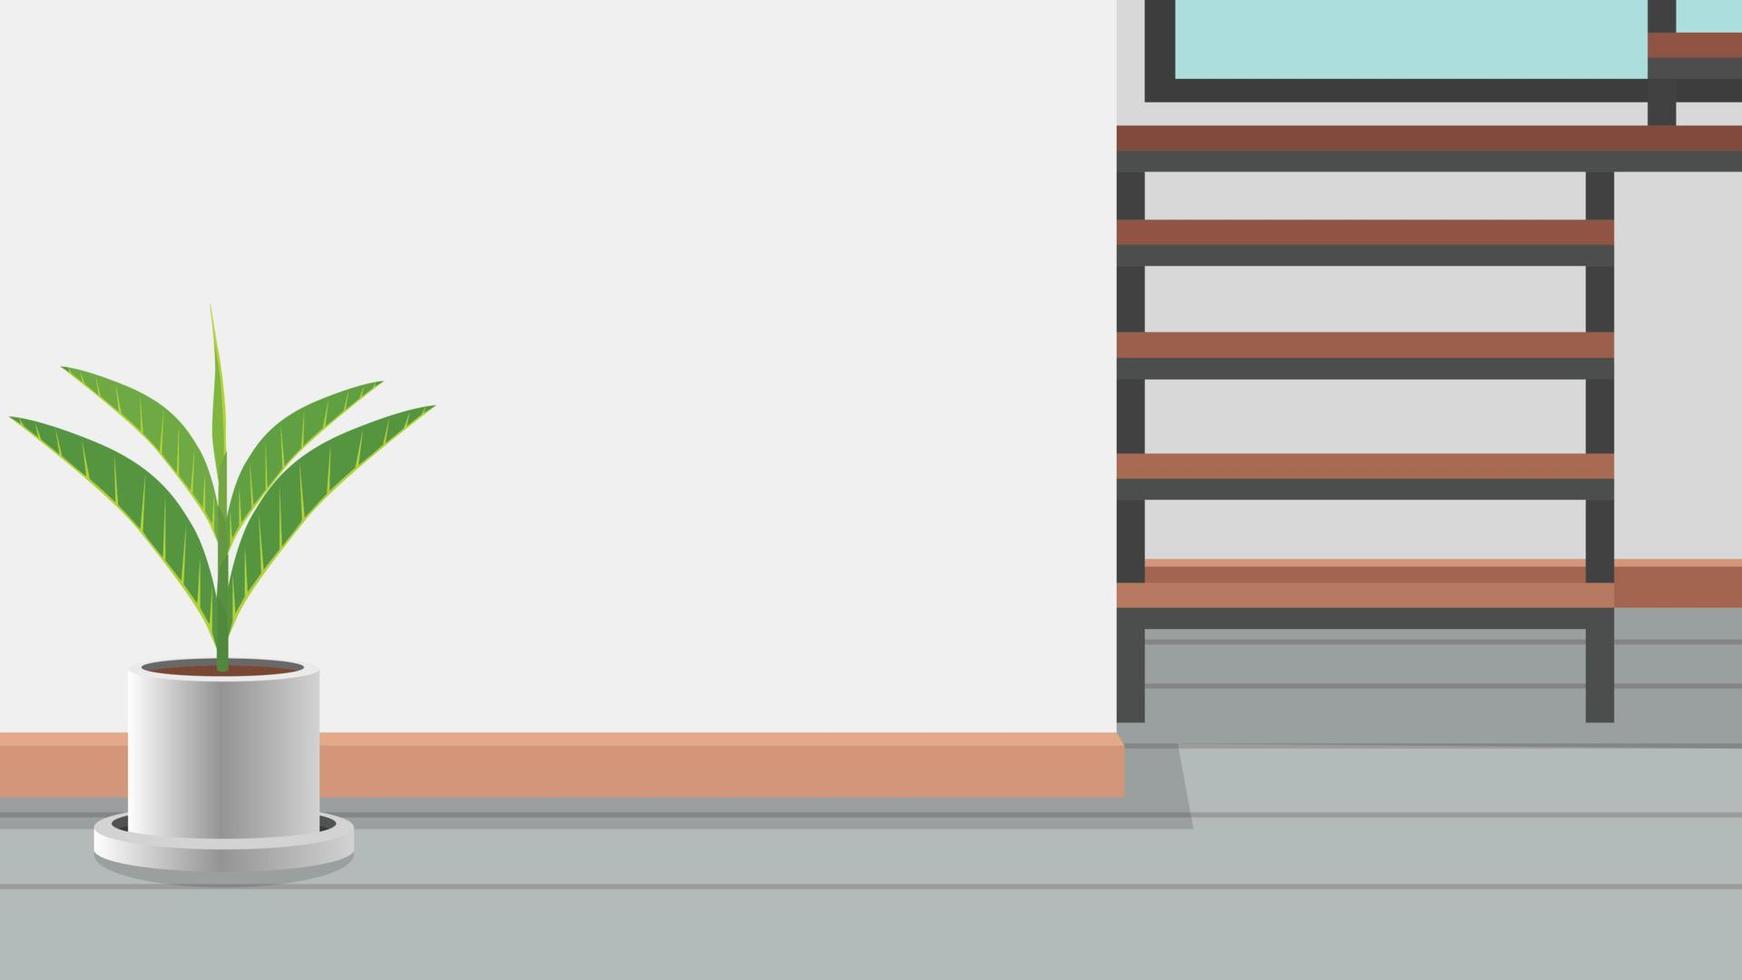 Background of interior design inside house with tree pot on the floor. Steel stairway leading upstairs is on the side. and the empty space of the wall in the middle of the house. vector